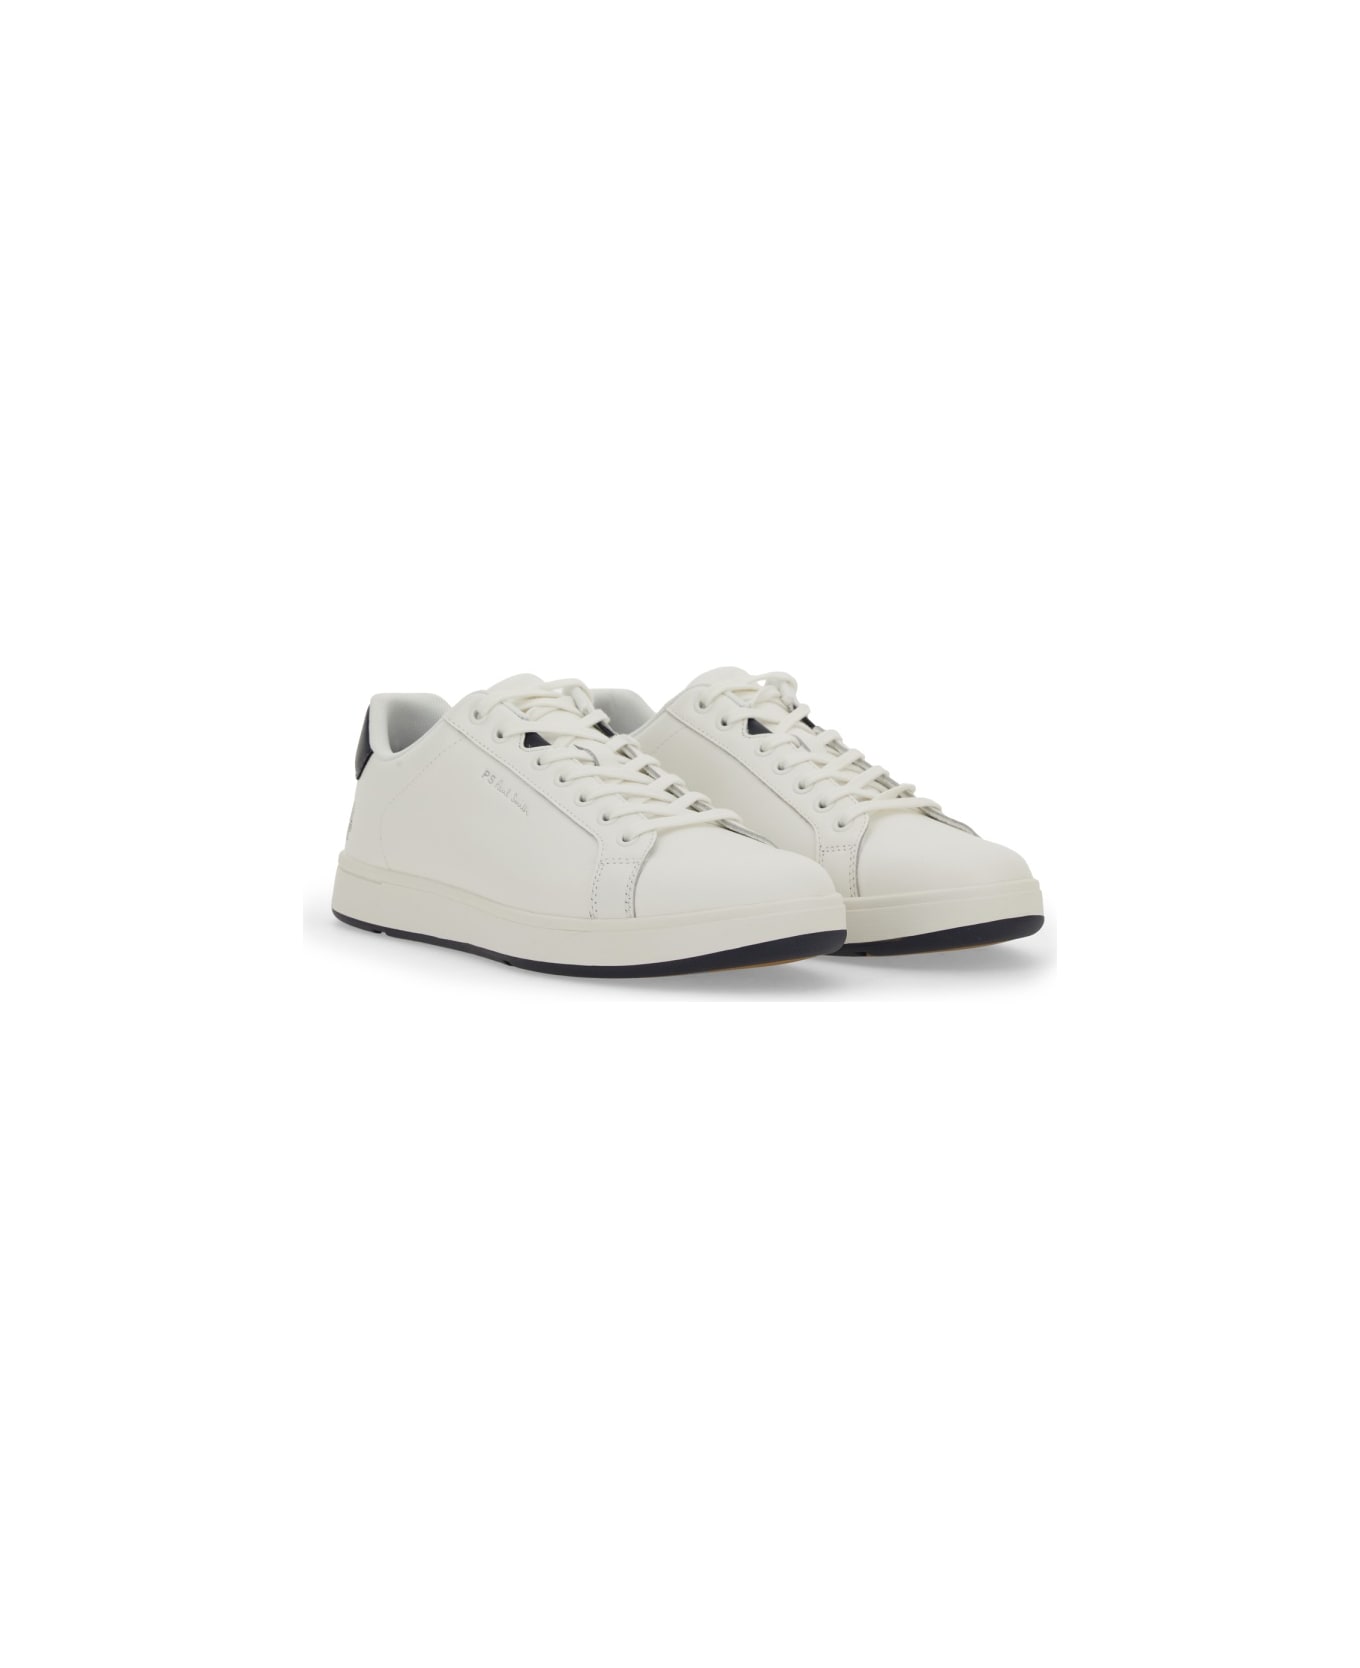 PS by Paul Smith "albany" Sneaker - WHITE スニーカー